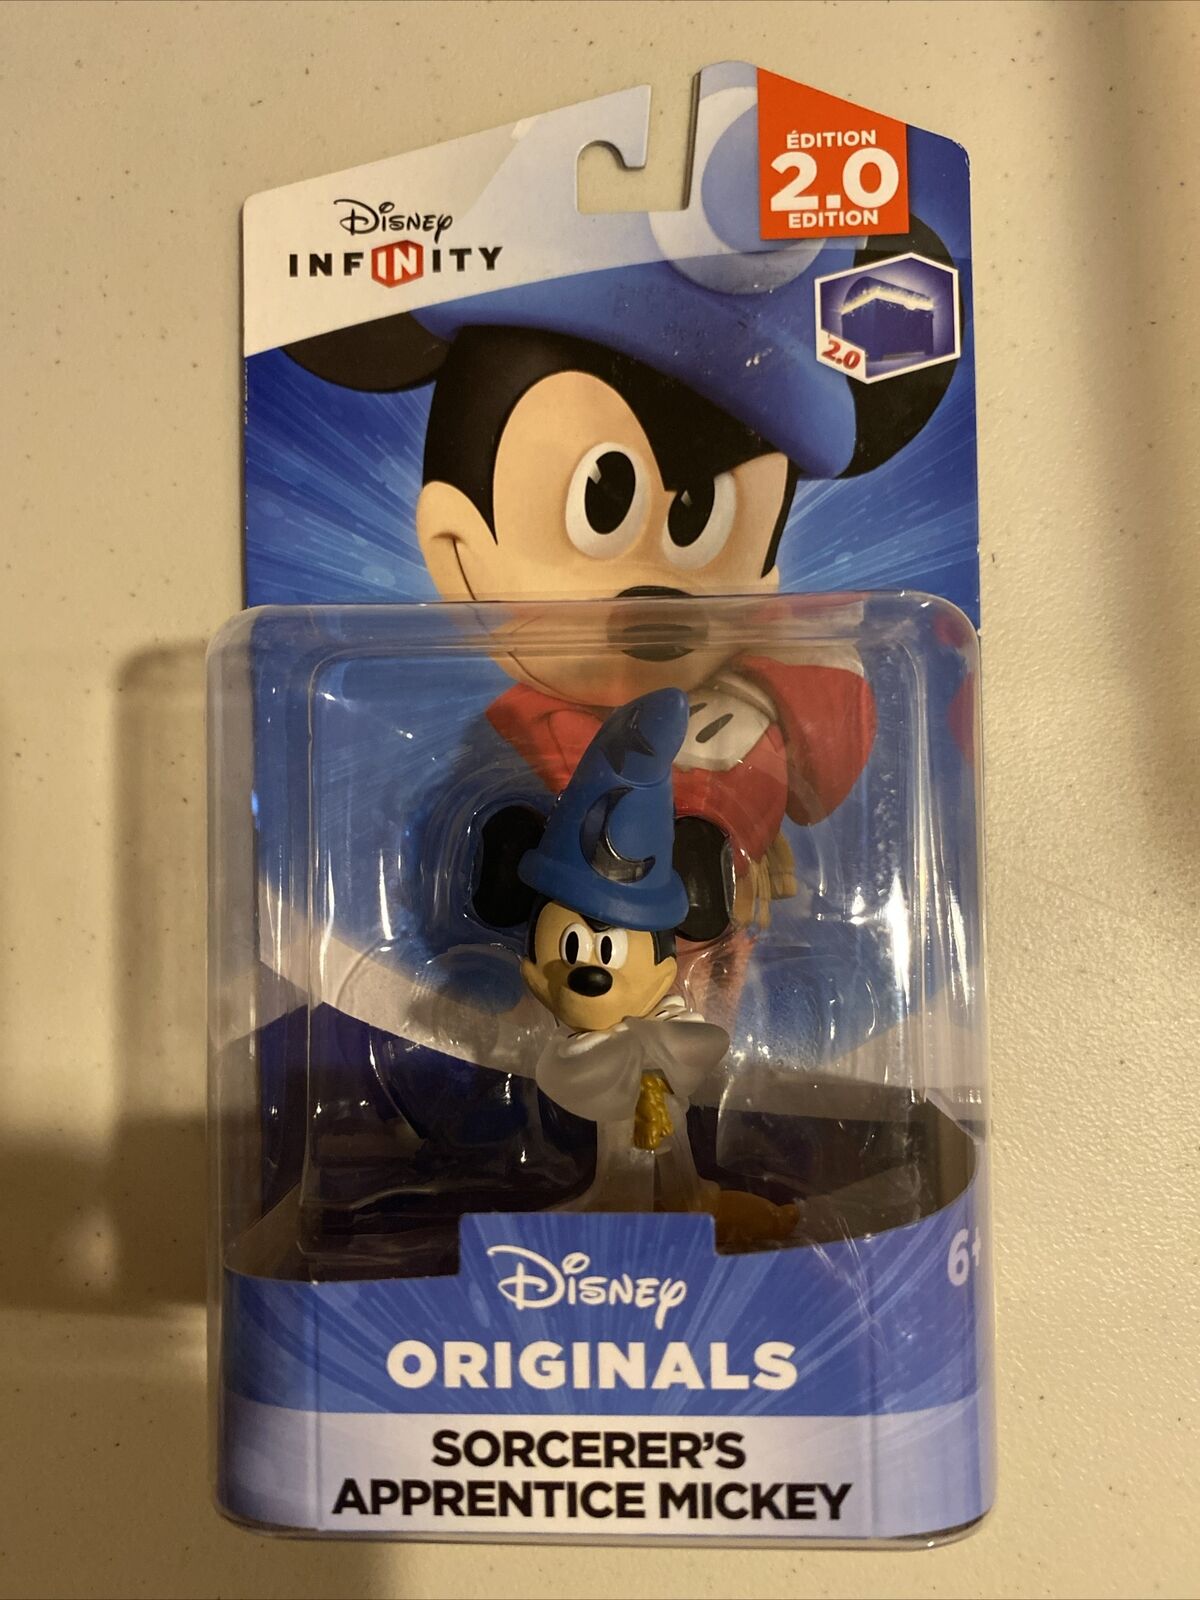 Disney Infinity 2.0 Edition Sorcerers Apprentice Mickey Action Figure (SEALED)